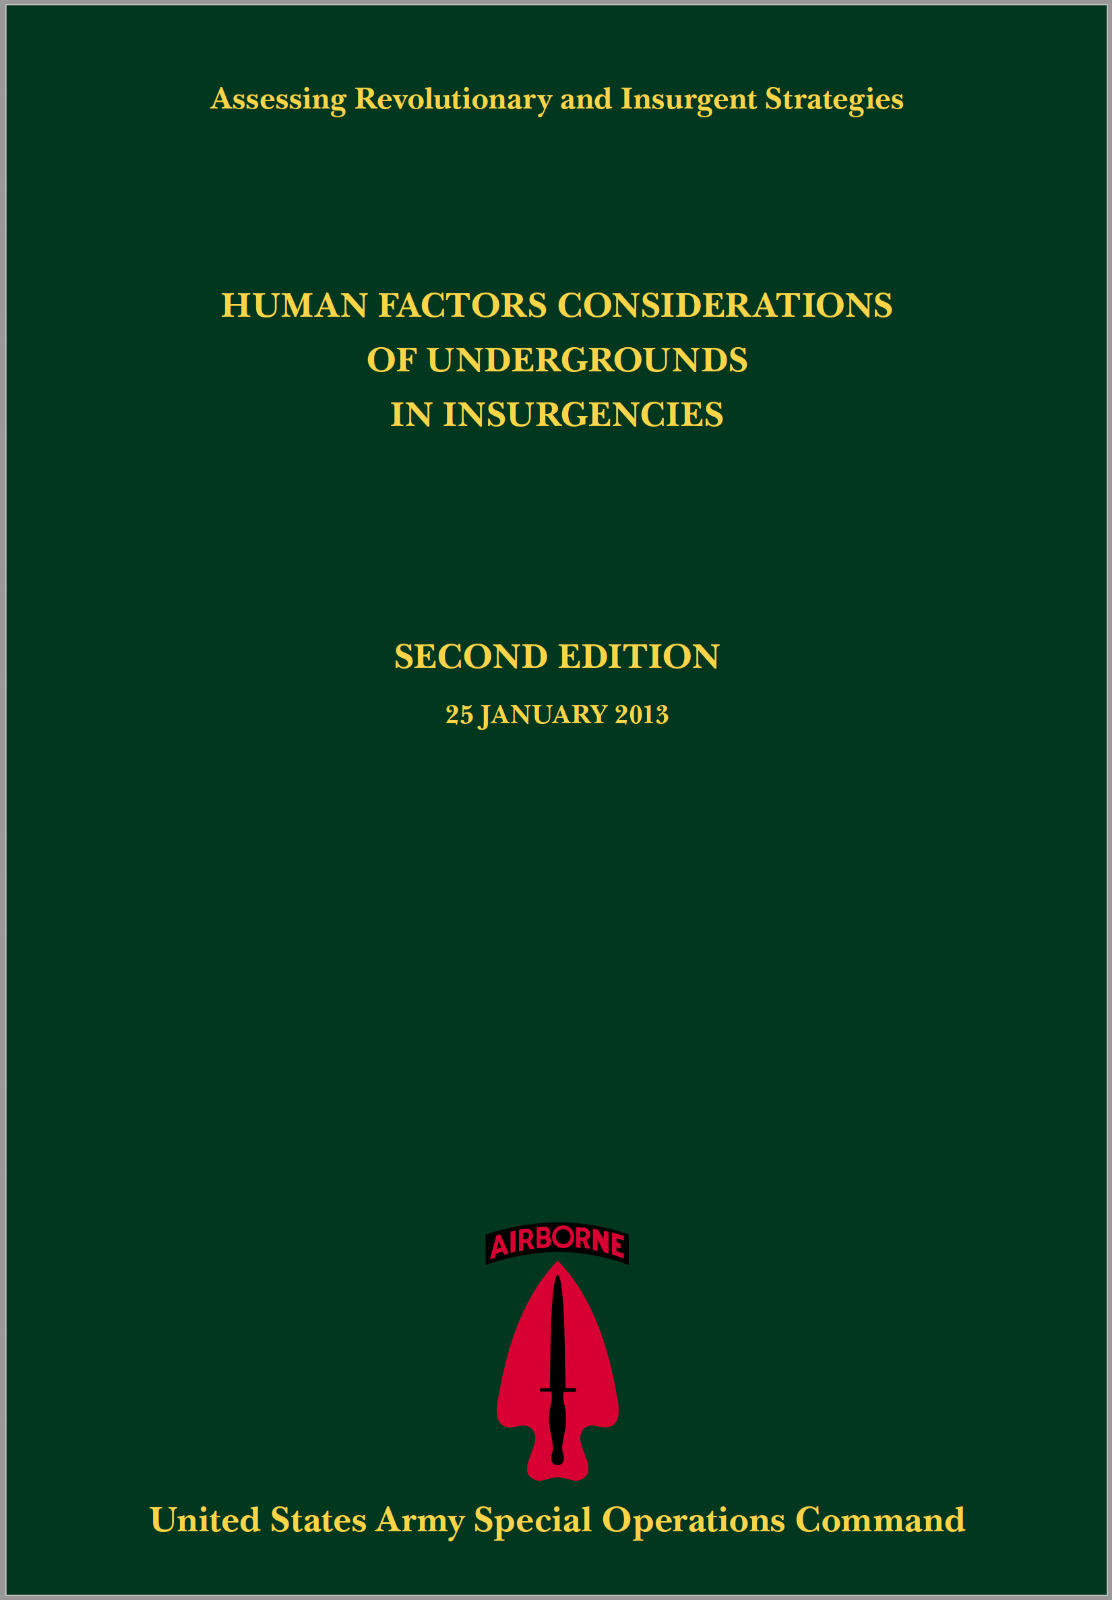 On CD 398 Page 2013 HUMAN FACTORS CONSIDERATIONS OF UNDERGROUNDS IN INSURGENCIES